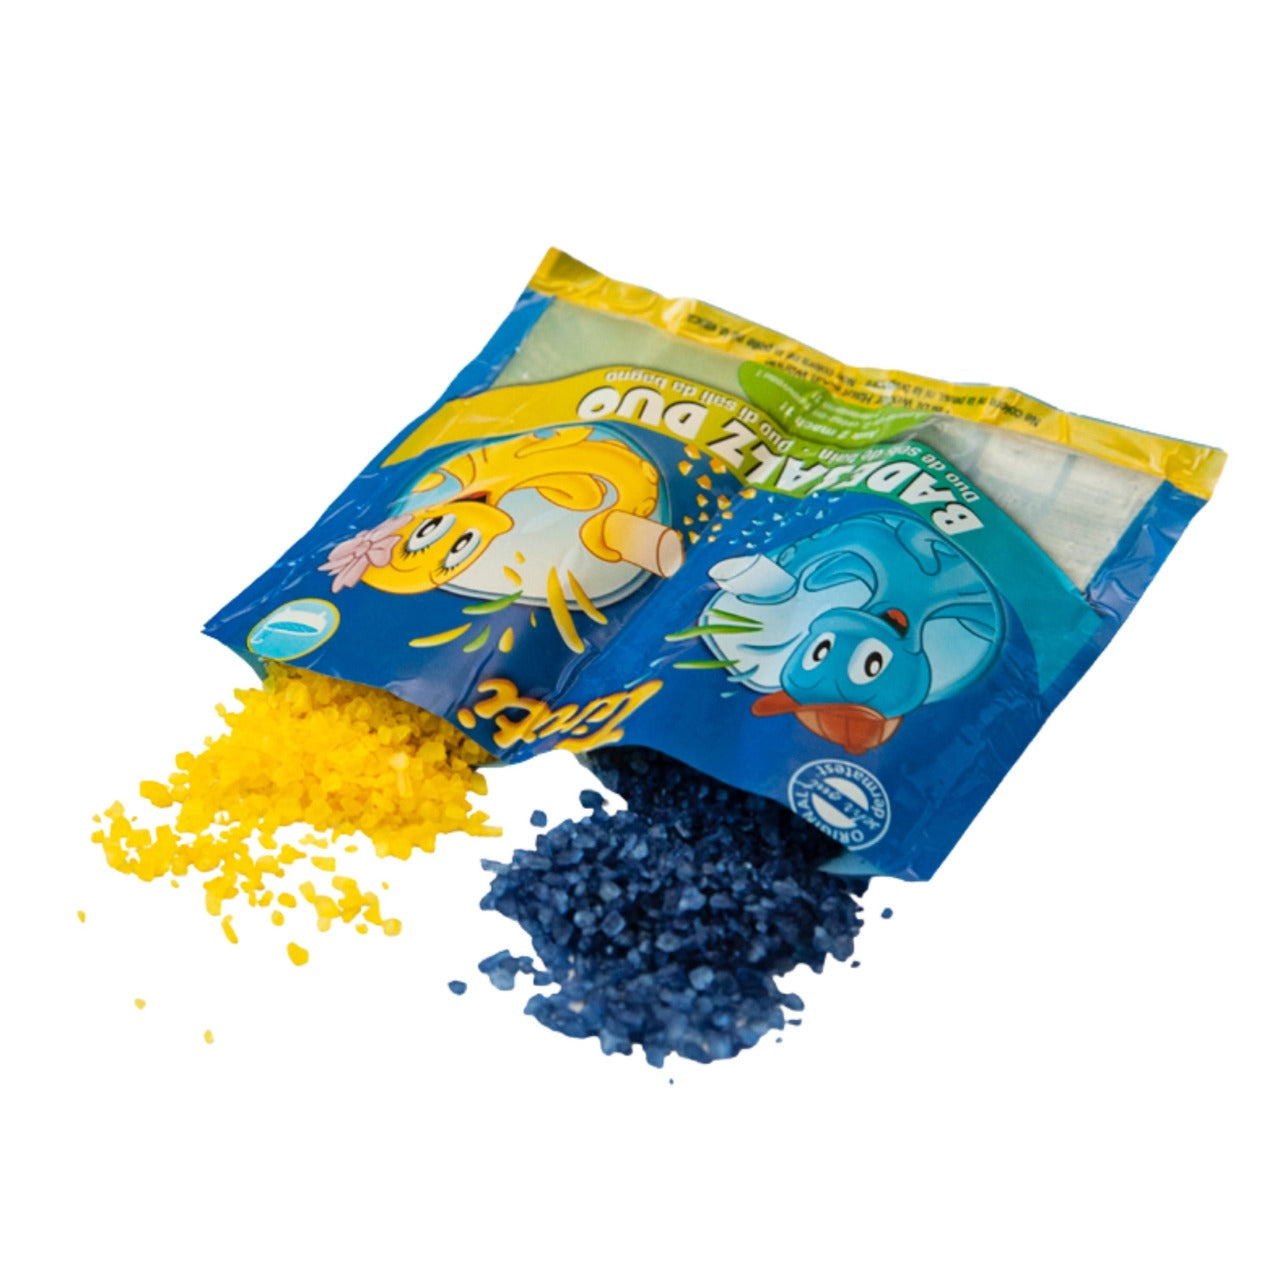 Colour Changing Bath Salts - Blue and Yellow